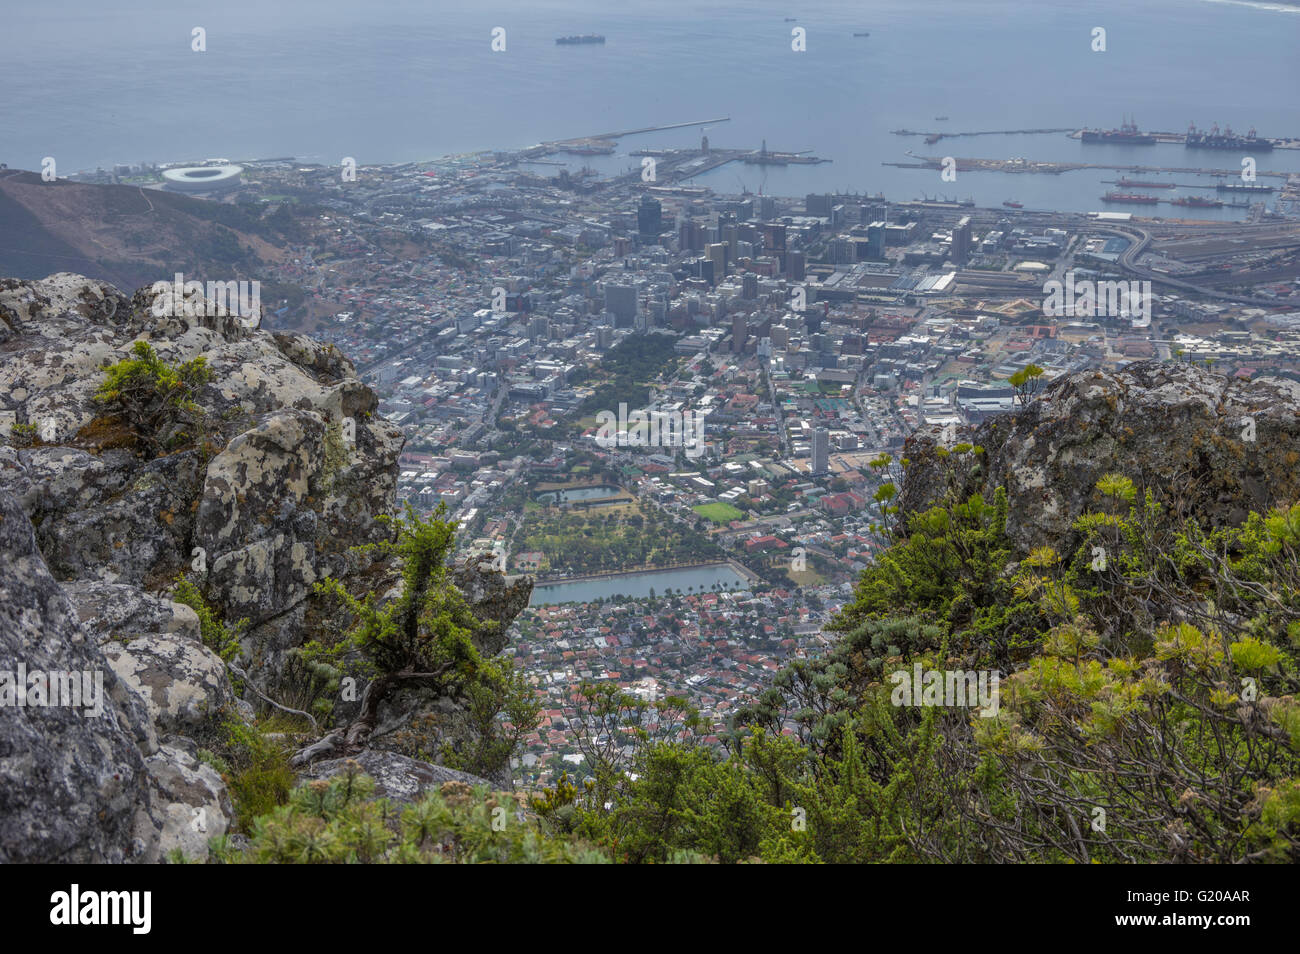 Table Mountain overlooks the city of Cape Town and is a famous landmark of South Africa Stock Photo